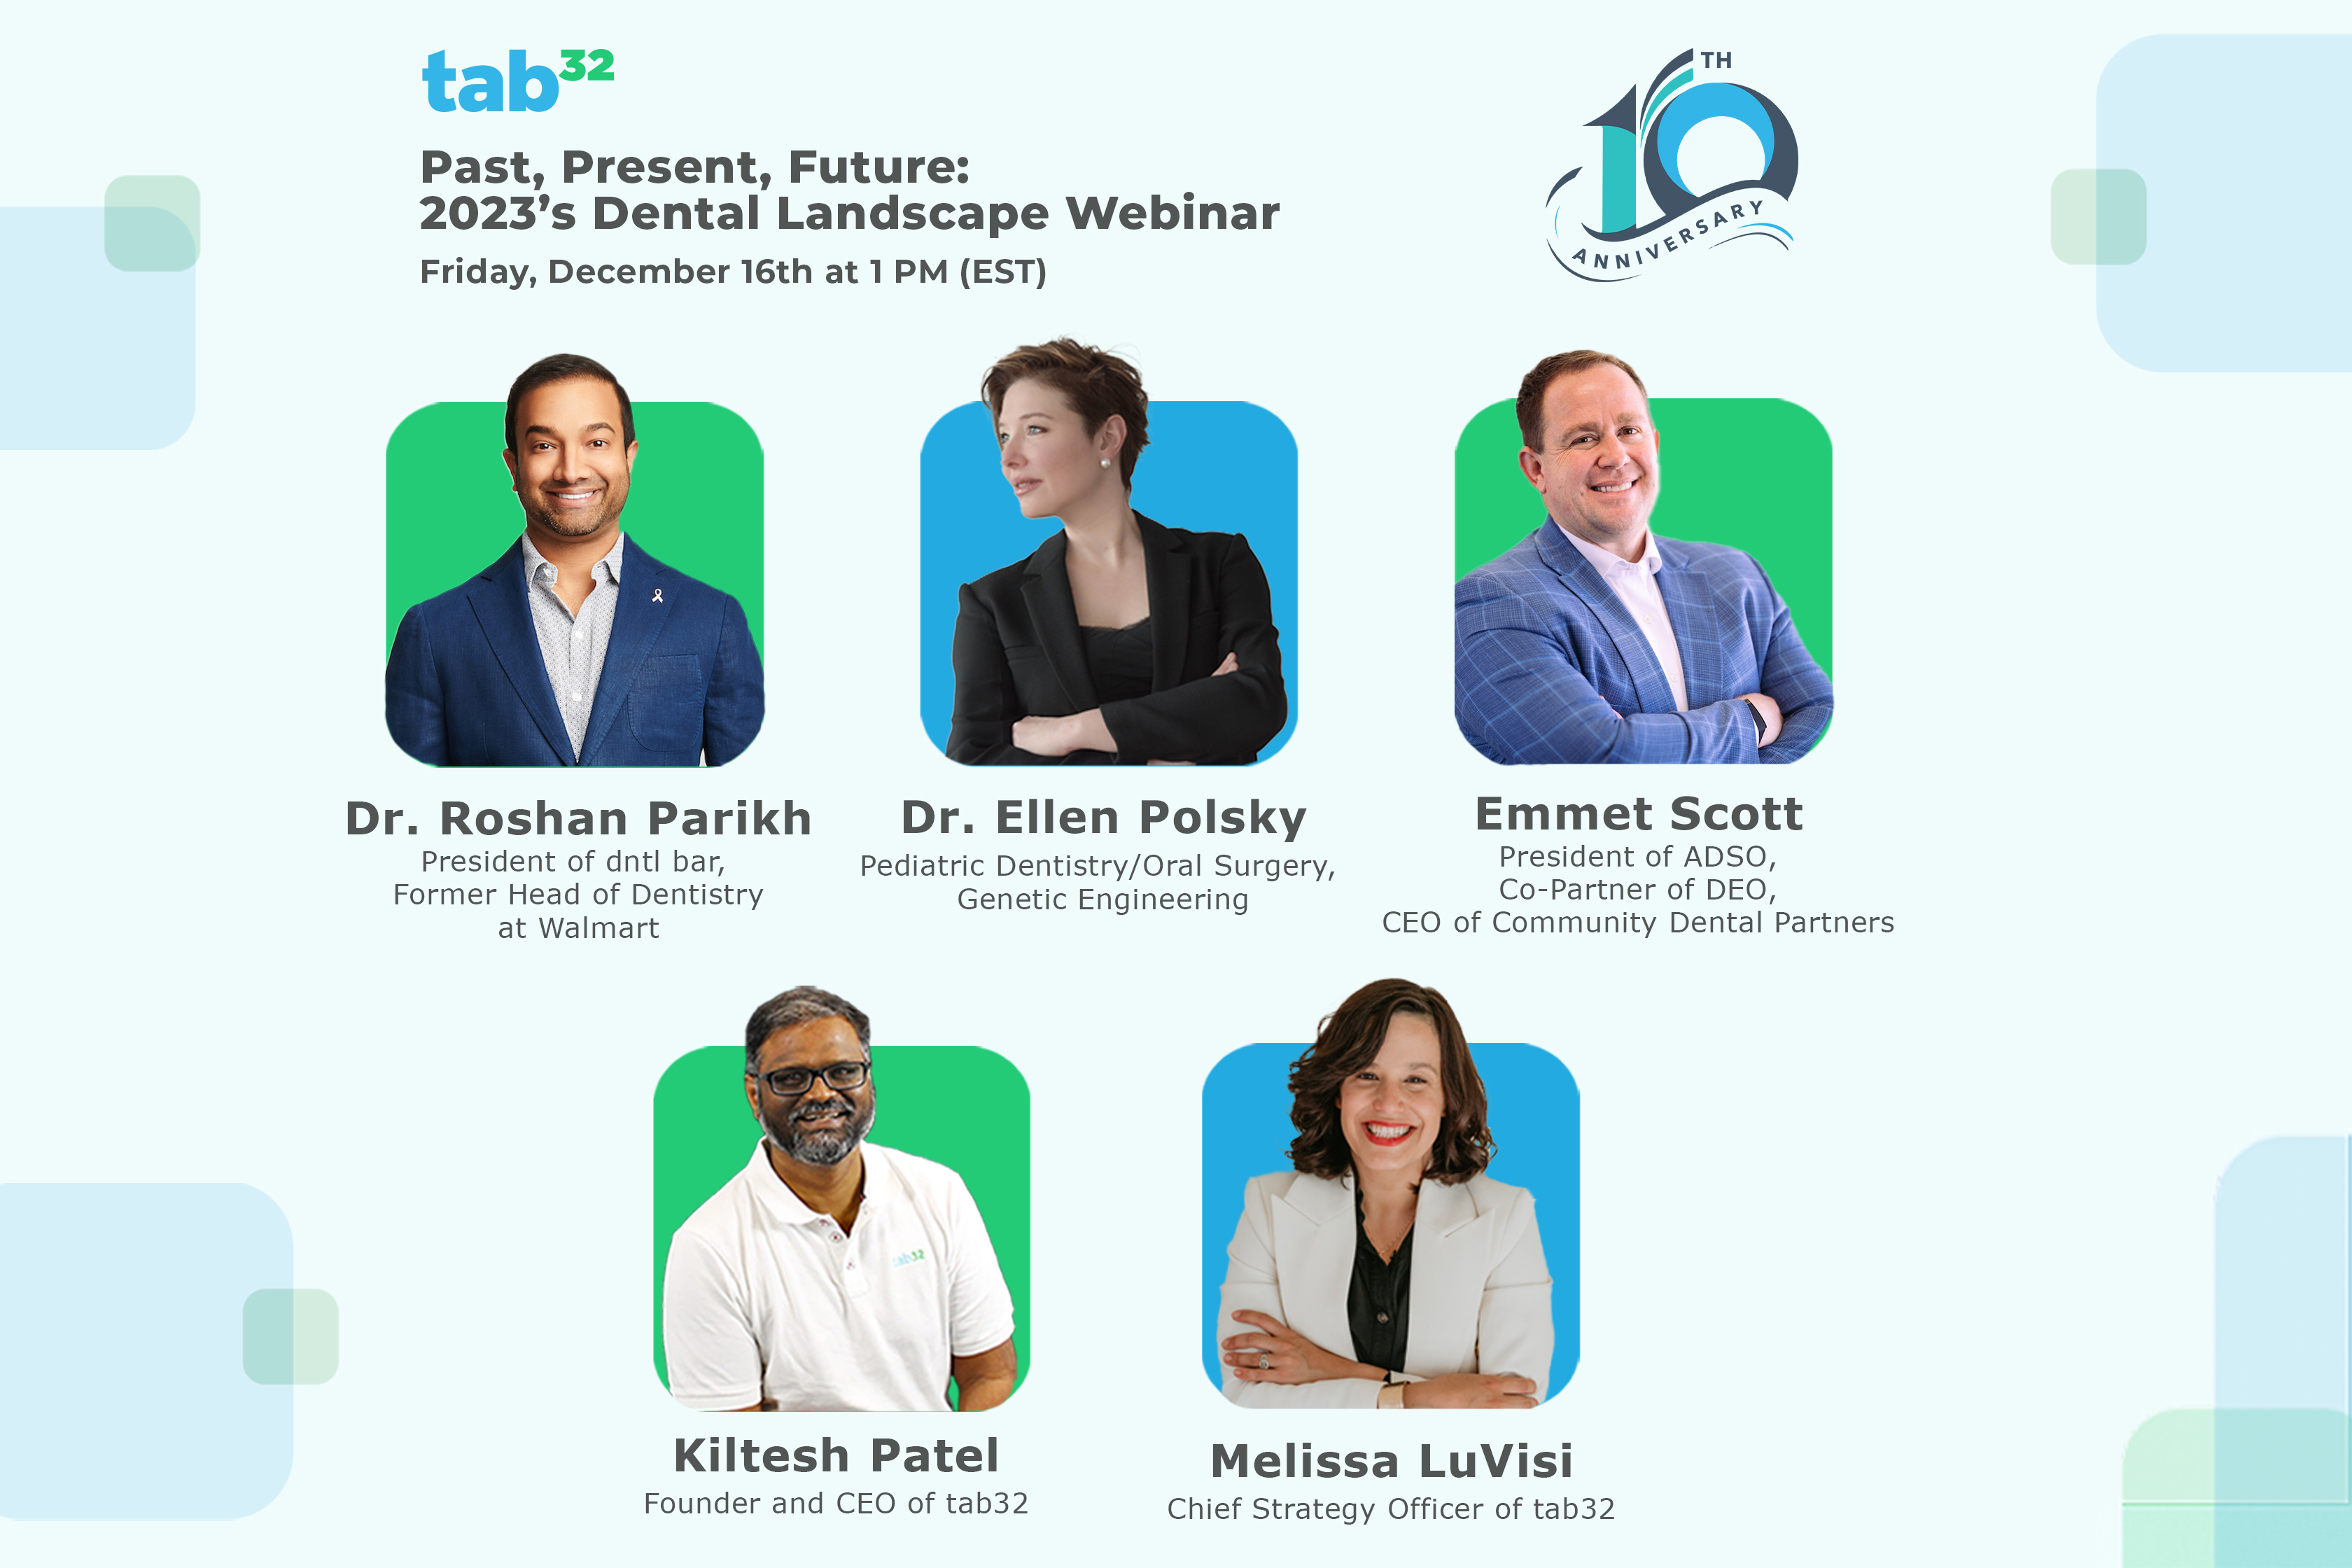 tab32 Commemorates 10 Years of Innovation with “Past, Present, Future: 2023’s Dental Landscape” Event